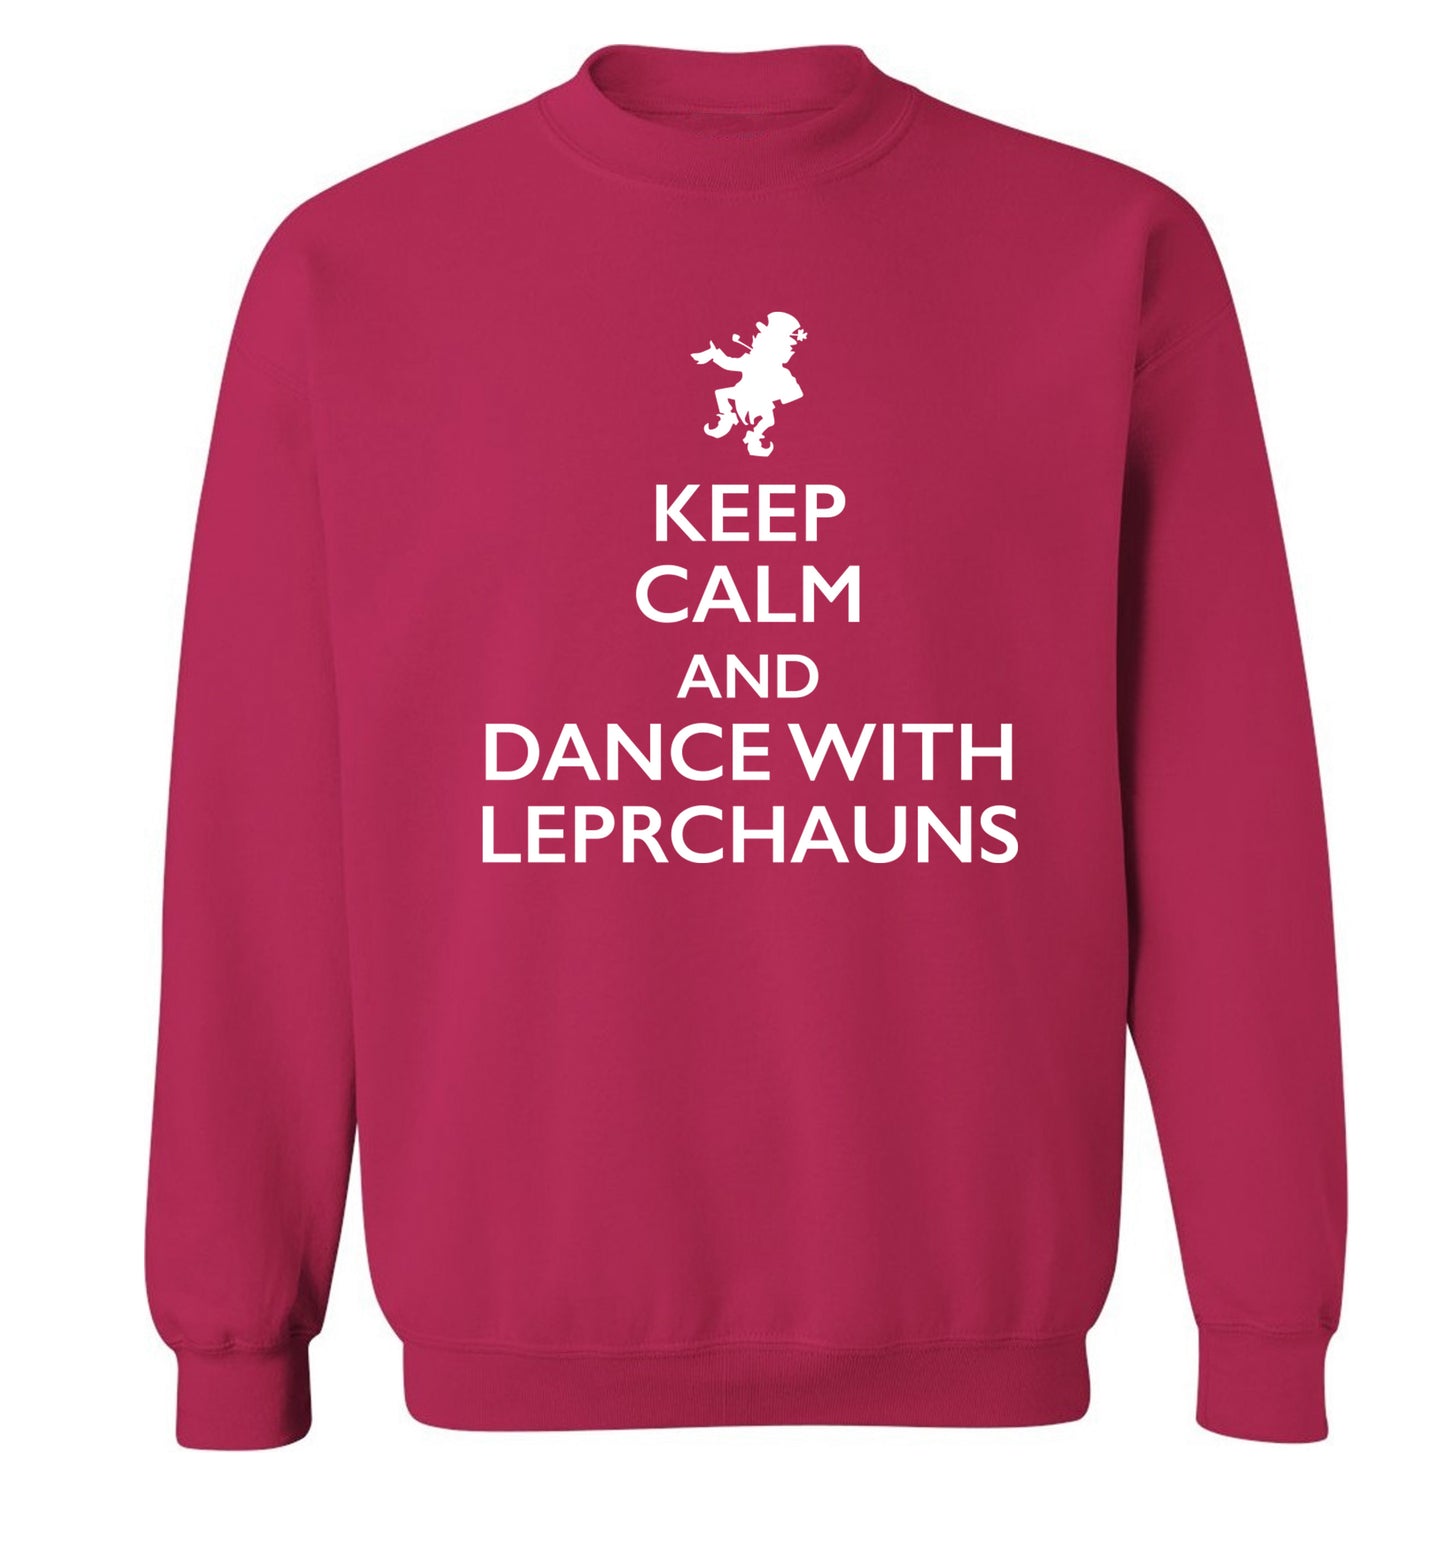 Keep calm and dance with leprechauns Adult's unisex pink Sweater 2XL